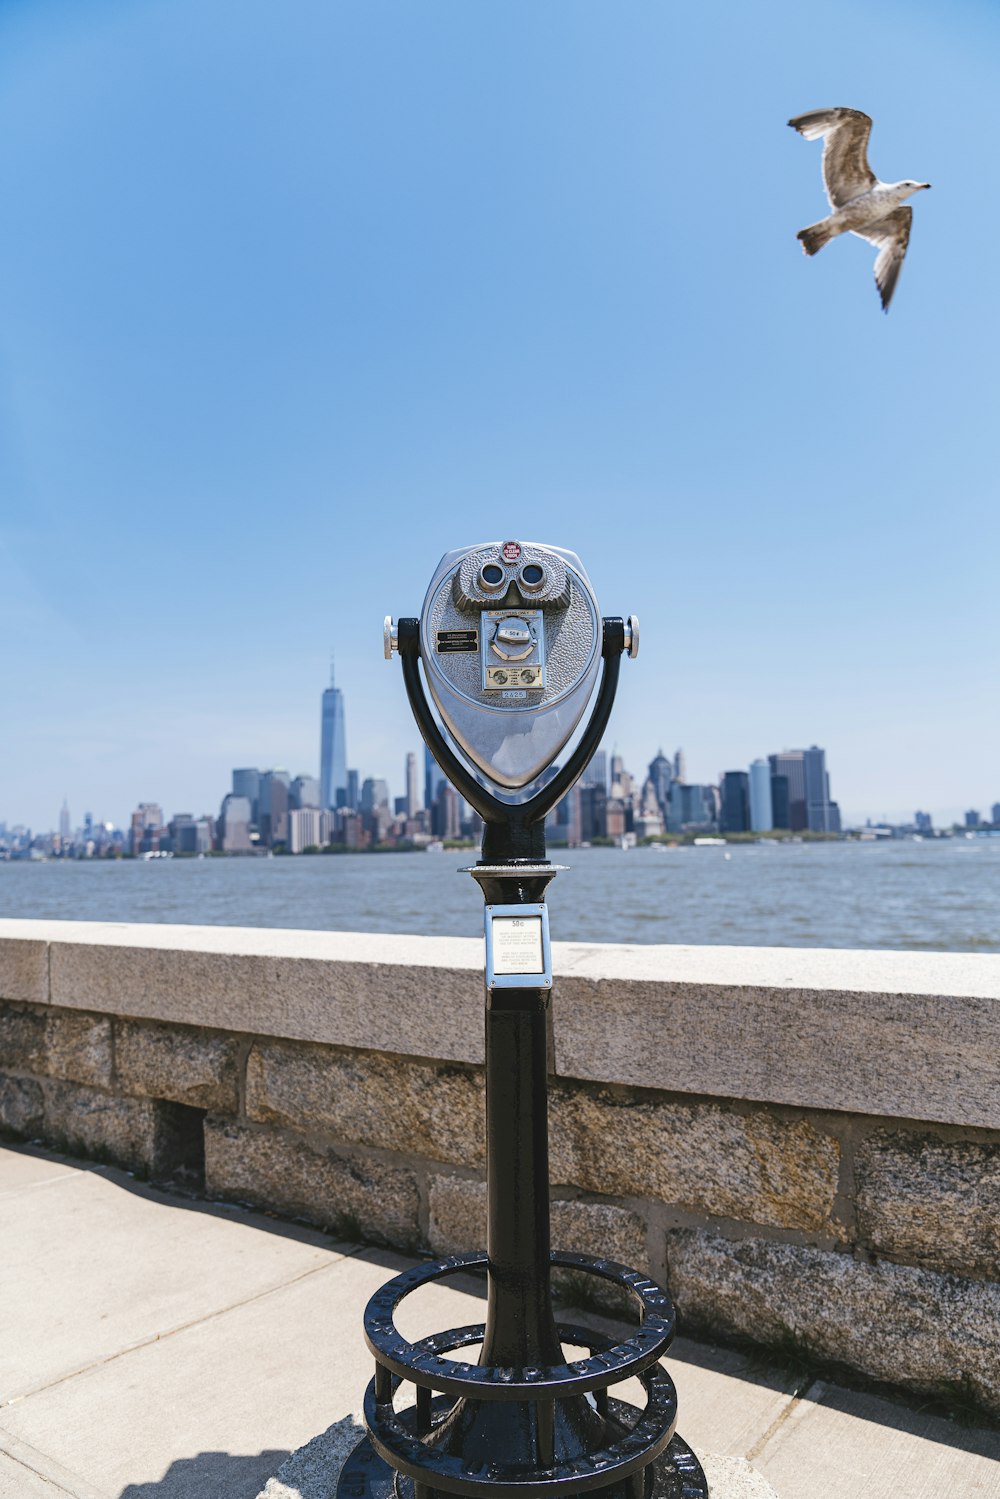 gray coin-operated telescope near pathway and seagull bird flying in the sky viewing New York City under blue and white sky